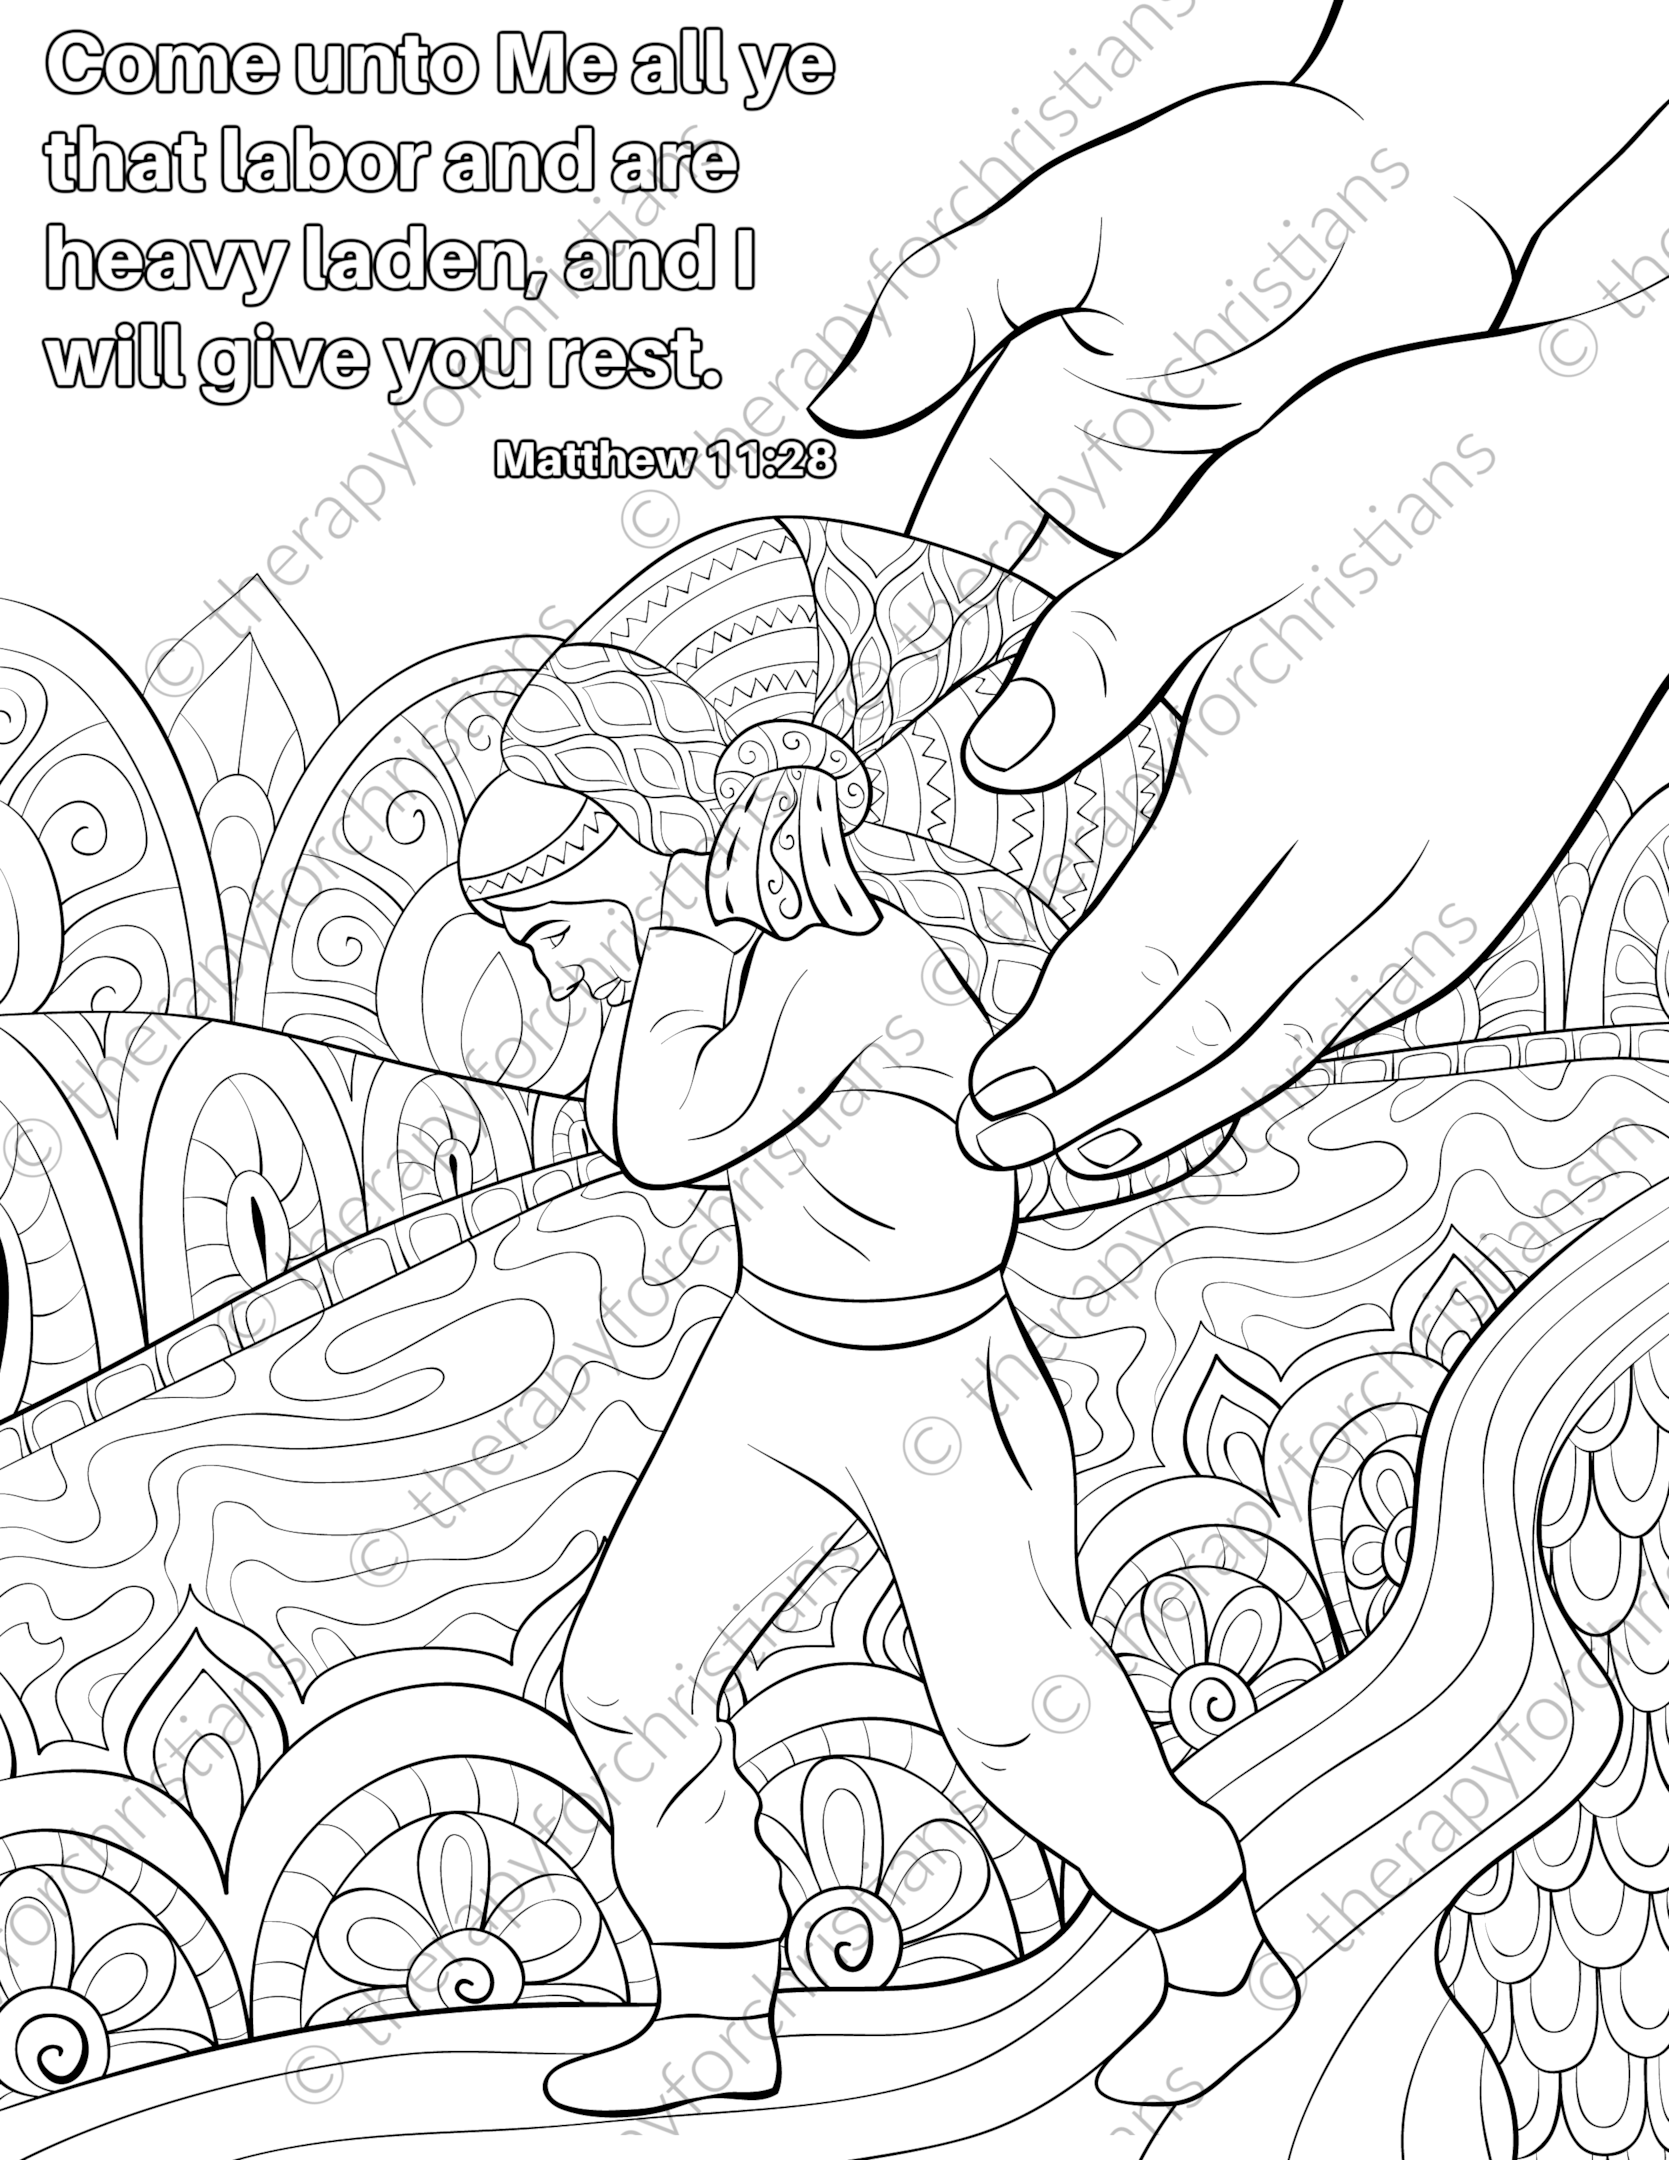 Matthew 11:28 Bible verse coloring pages for adults 